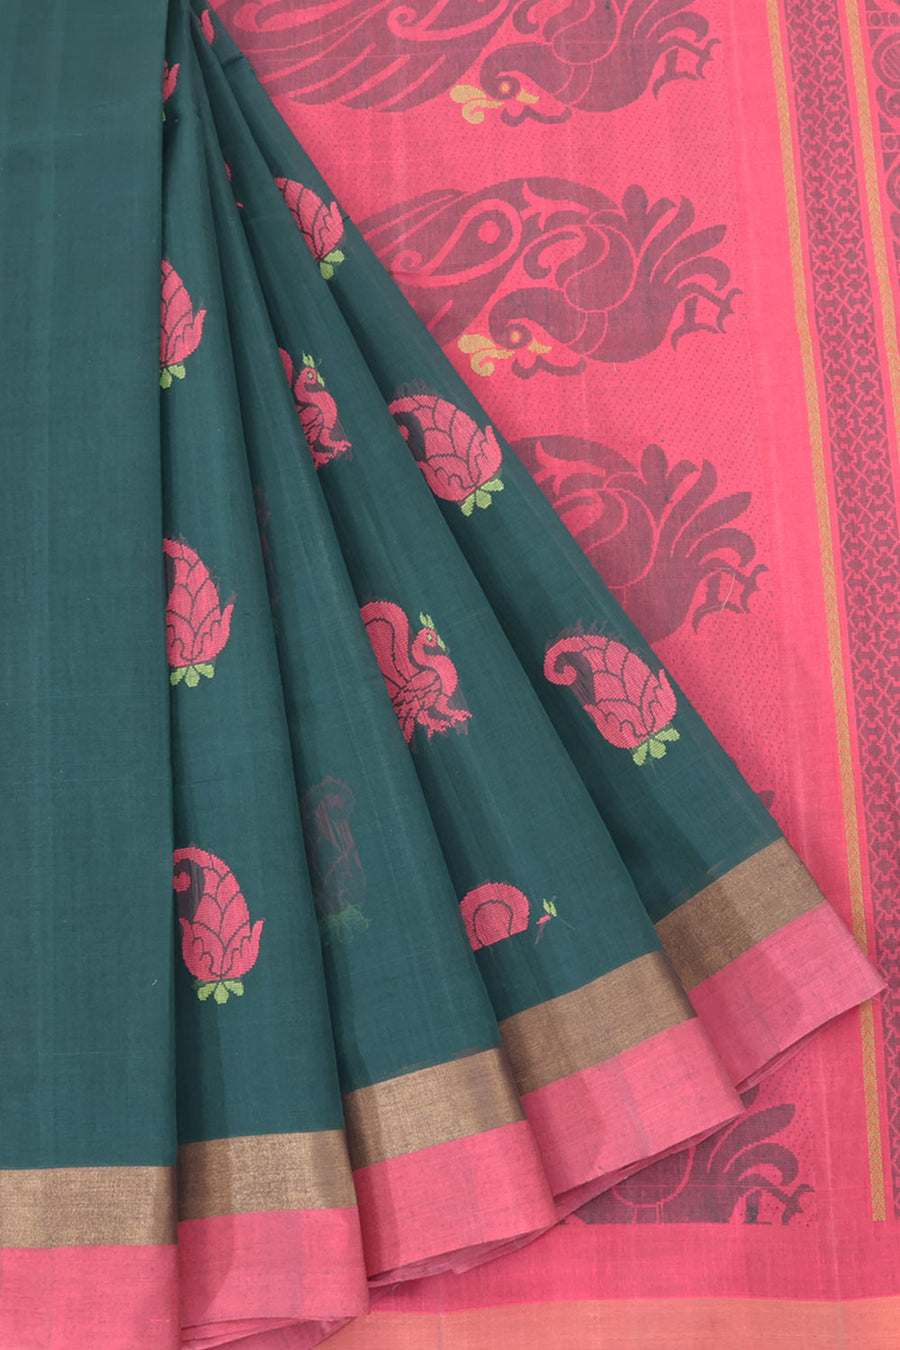 Handwoven Kanchi Cotton Saree with Peacock and Paisley Motifs Design and Contrast Pallu with Peacock Design